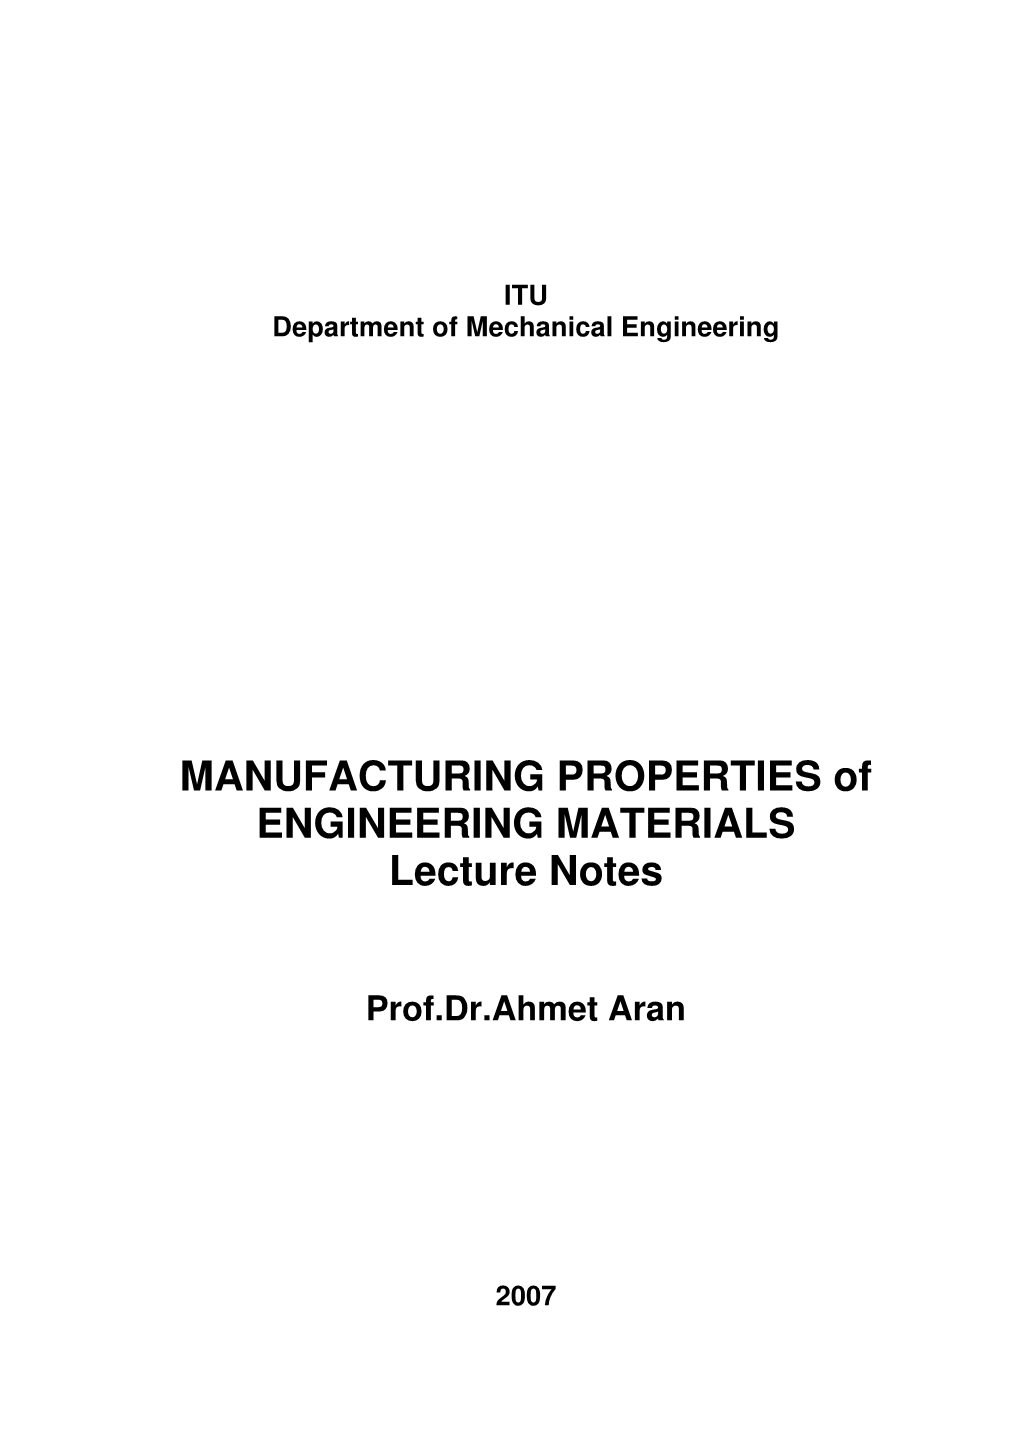 MANUFACTURING PROPERTIES of ENGINEERING MATERIALS Lecture Notes